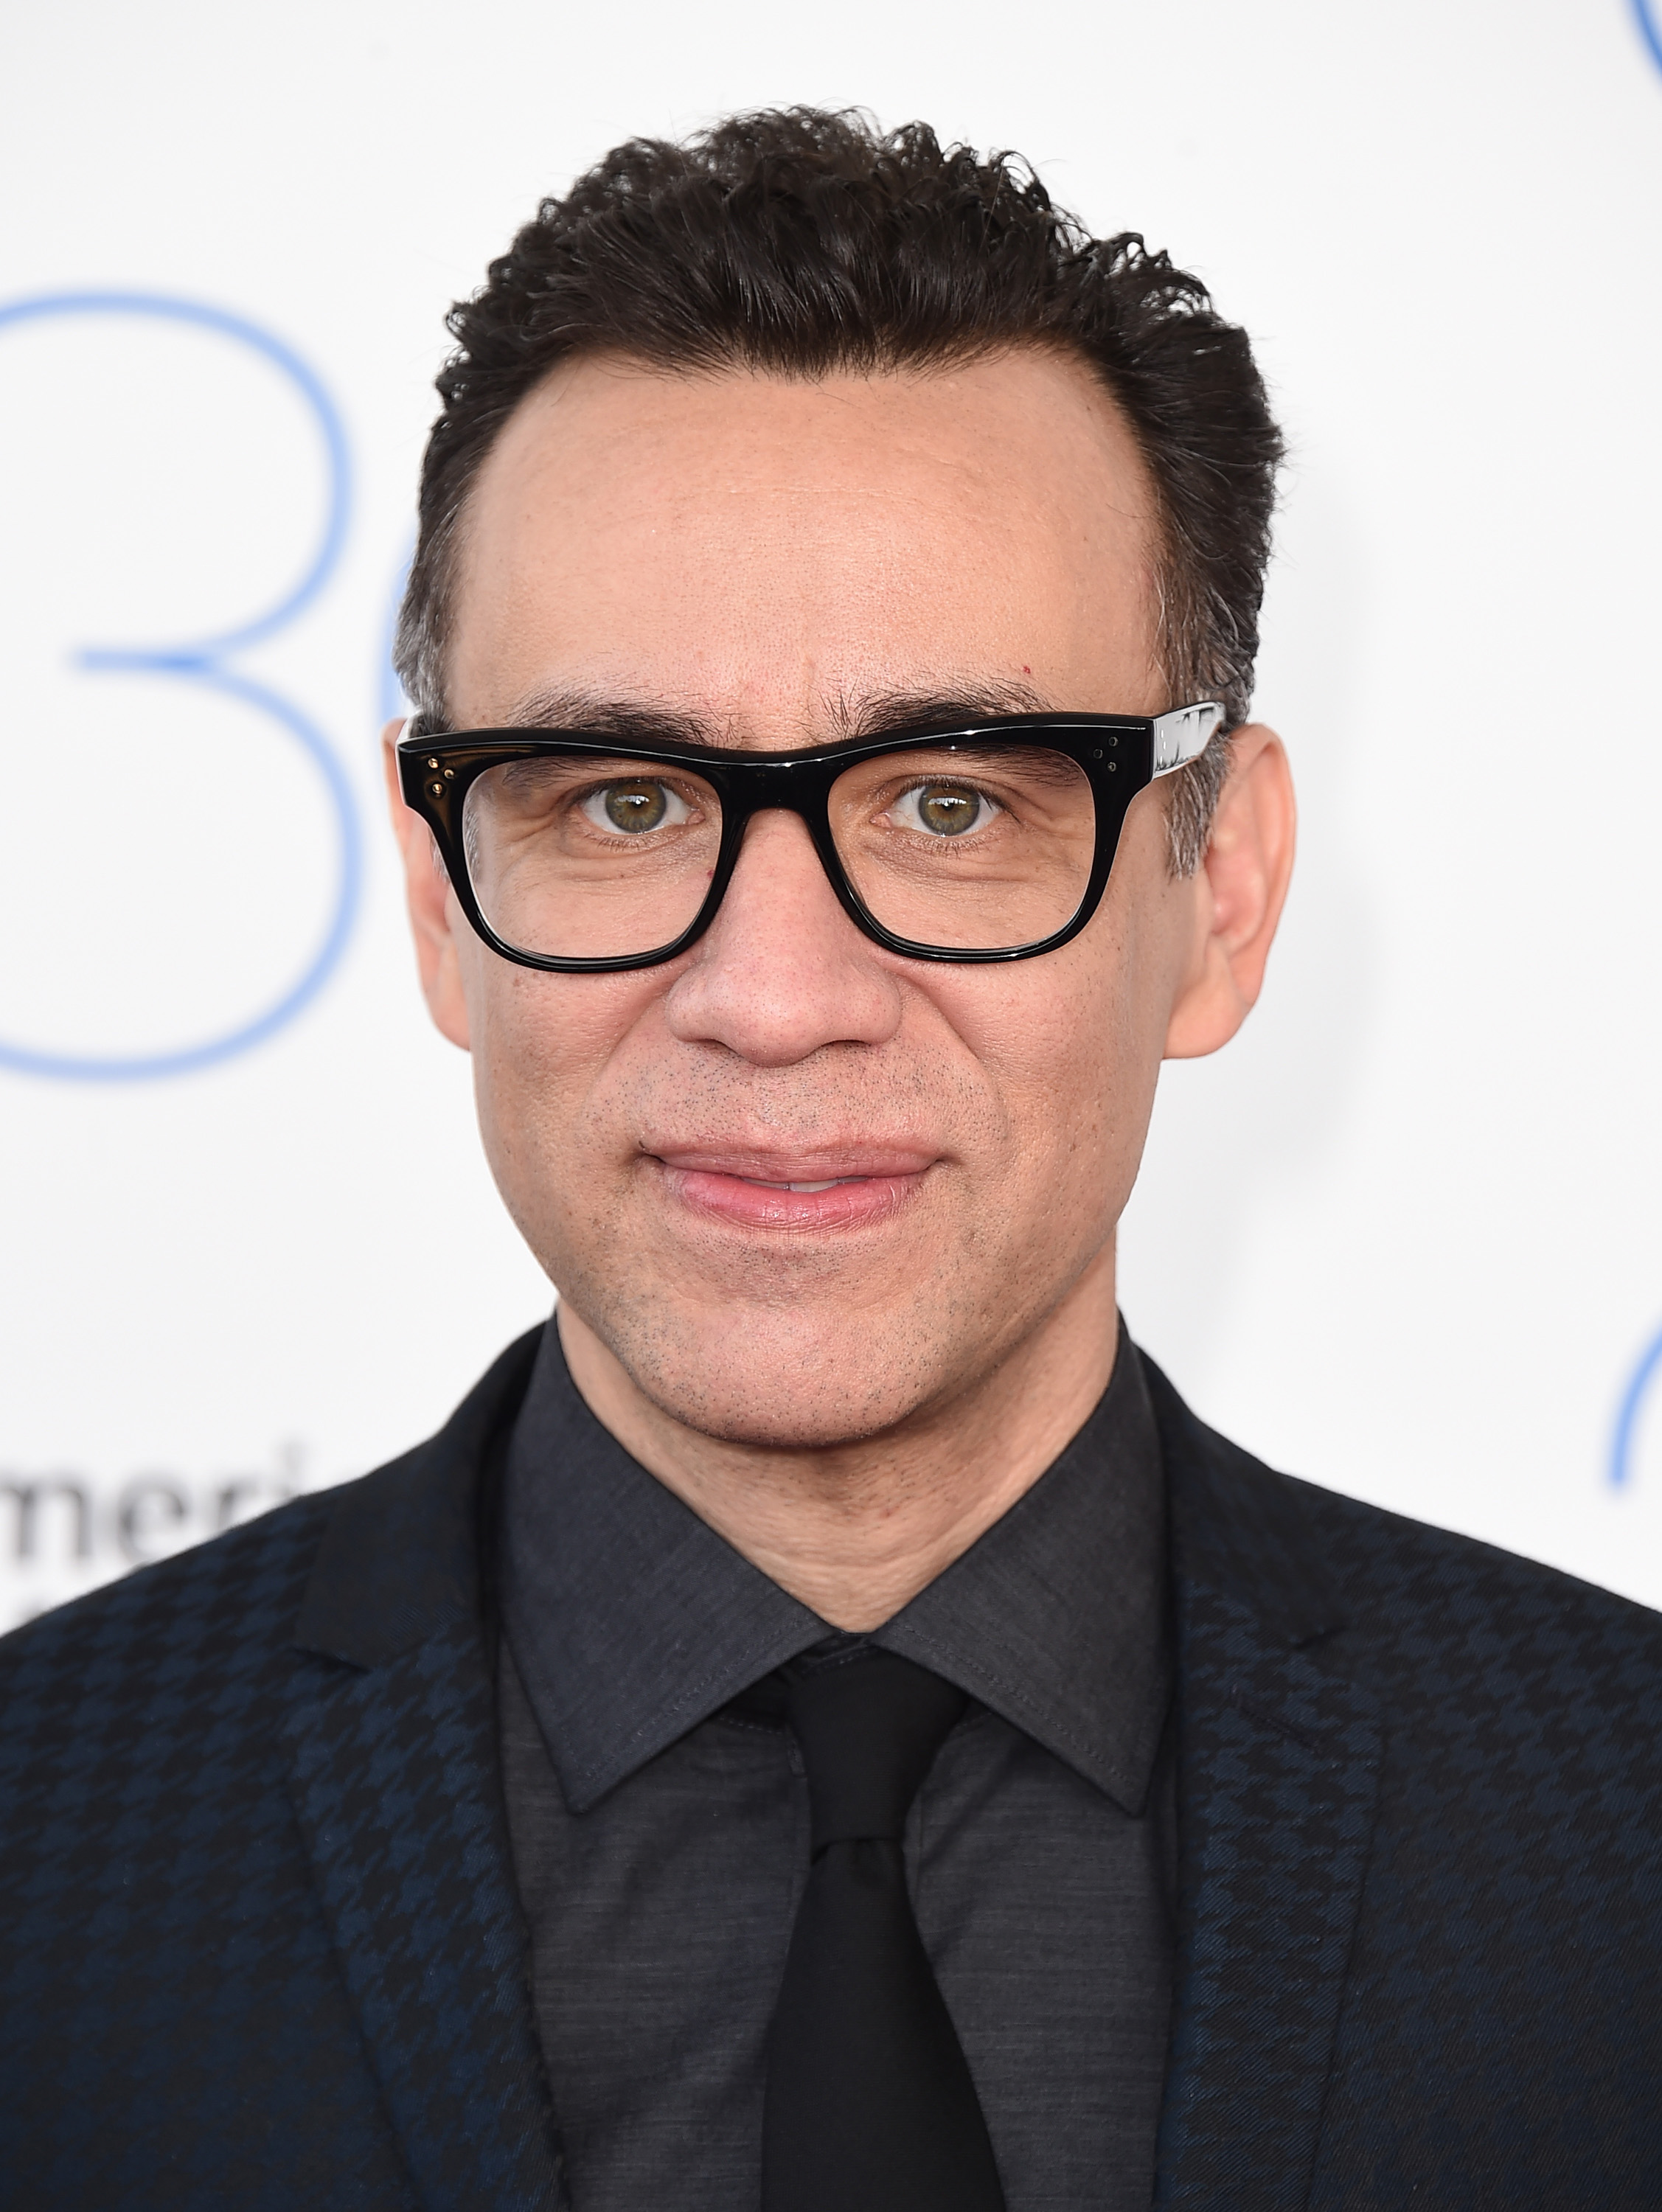 How tall is Fred Armisen?